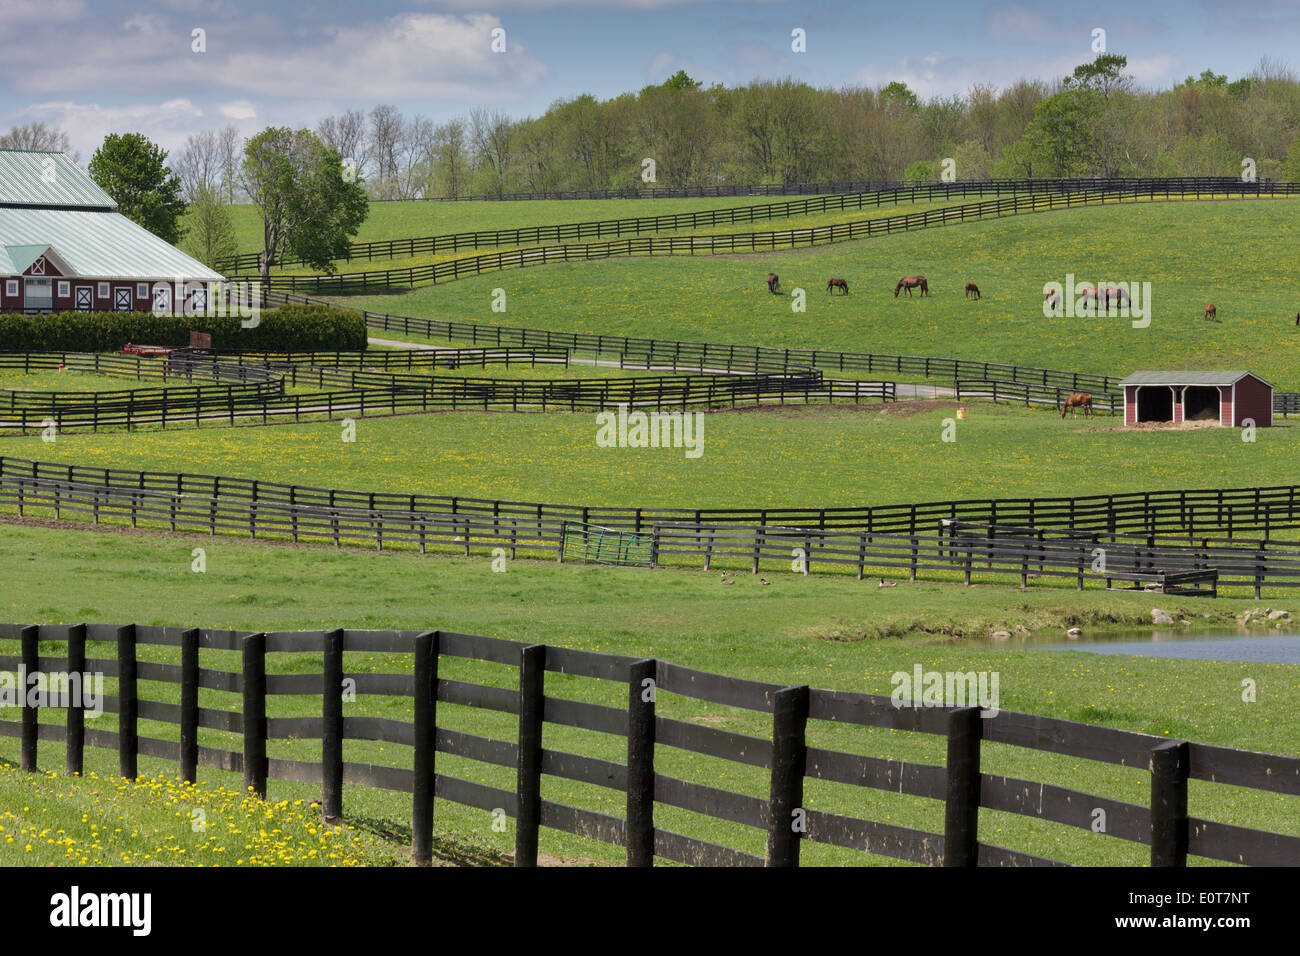 Horse farm with fencing, in West Charlton, Saratoga County, New York State Stock Photo